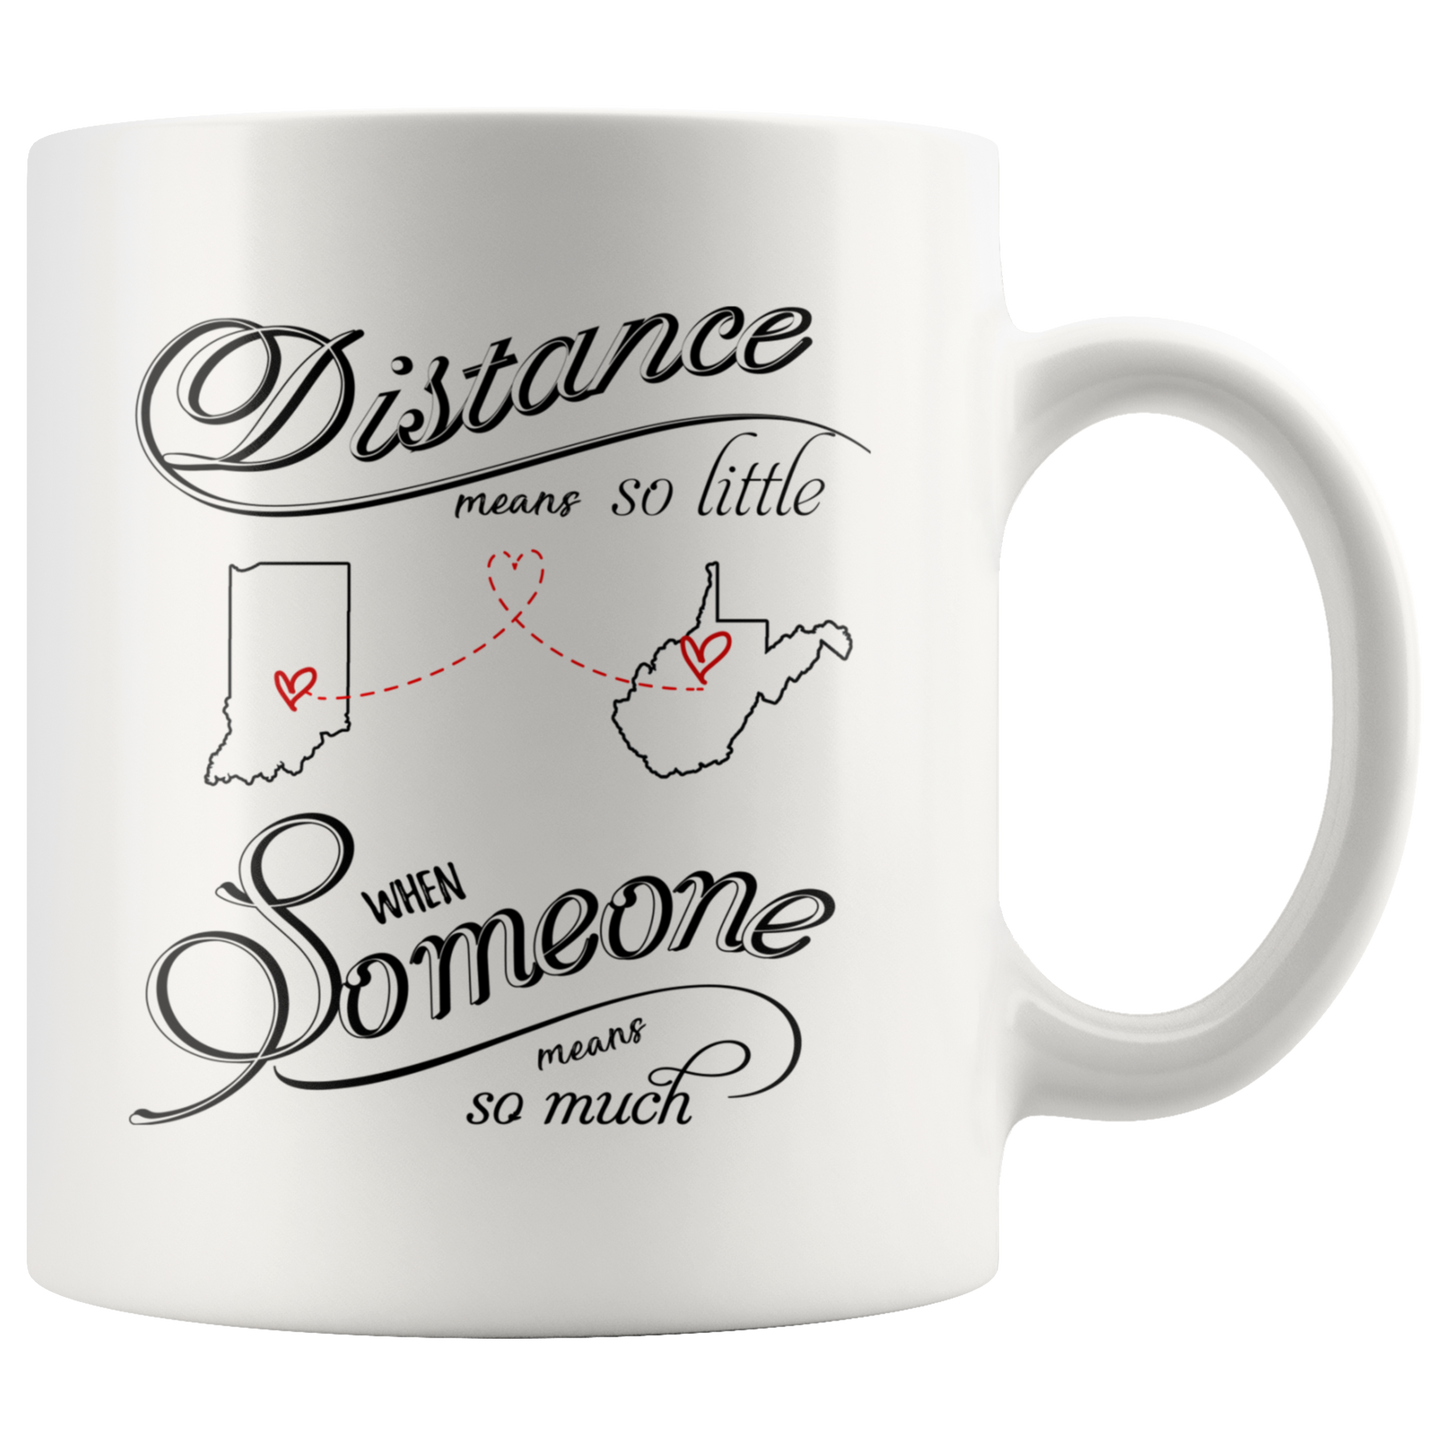 M-20485045-sp-22809 - Mothers Day Coffee Mug Indiana West Virginia Distance Means